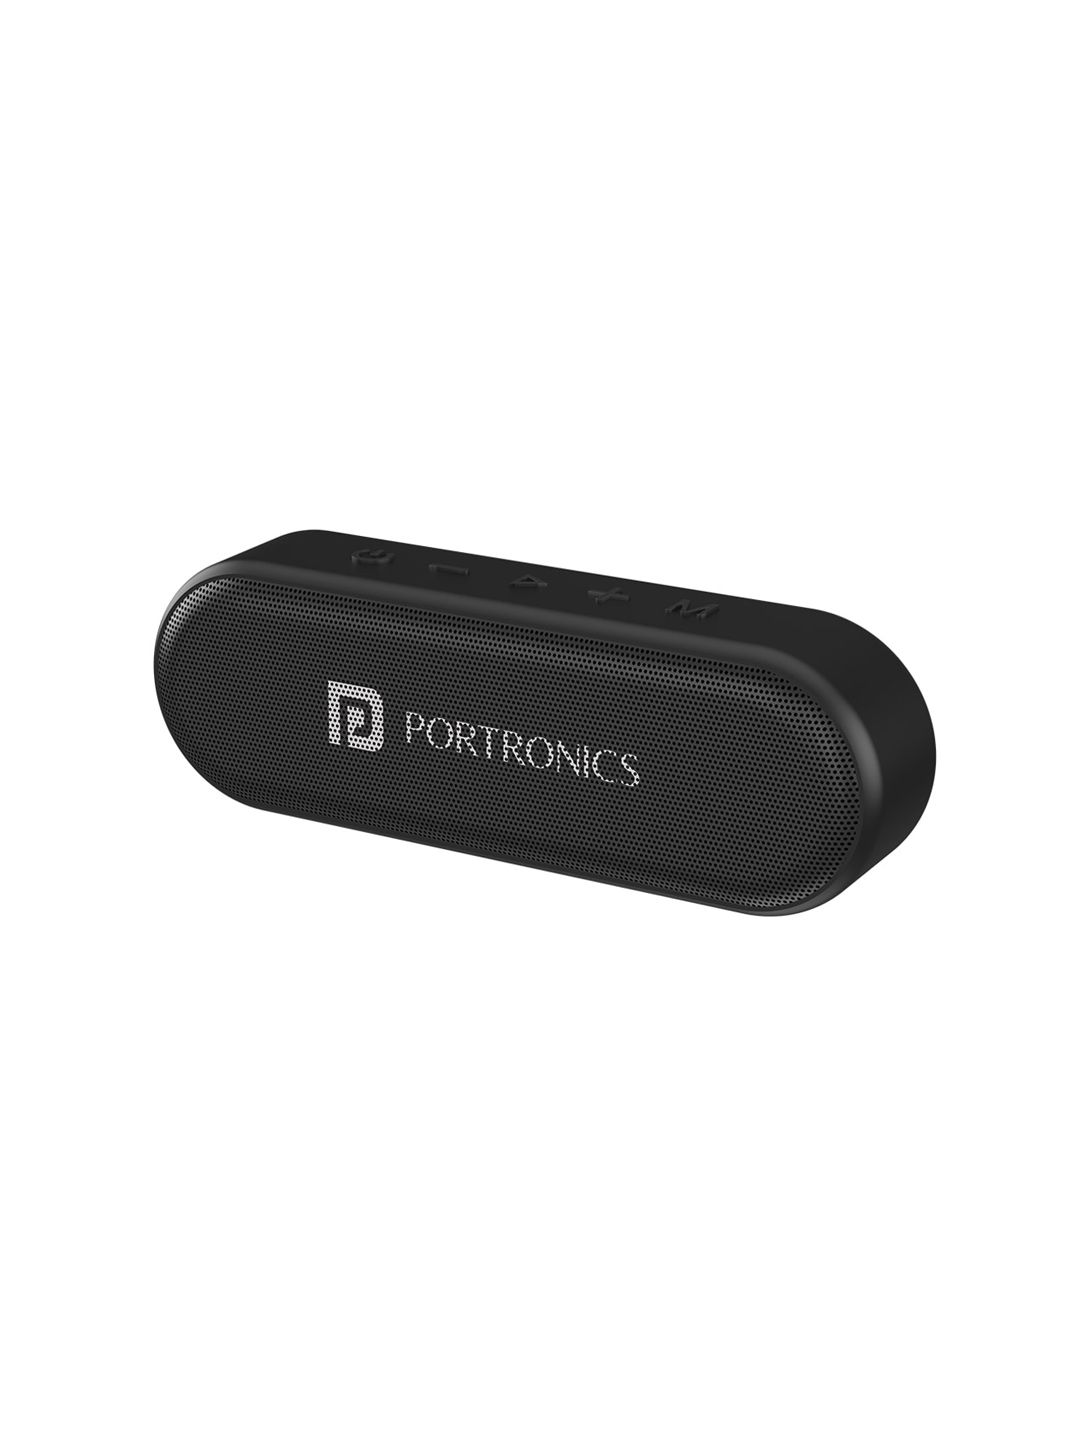 Portronics Black 15W Wireless Bluetooth Speaker with TWS, Built-in Mic Price in India